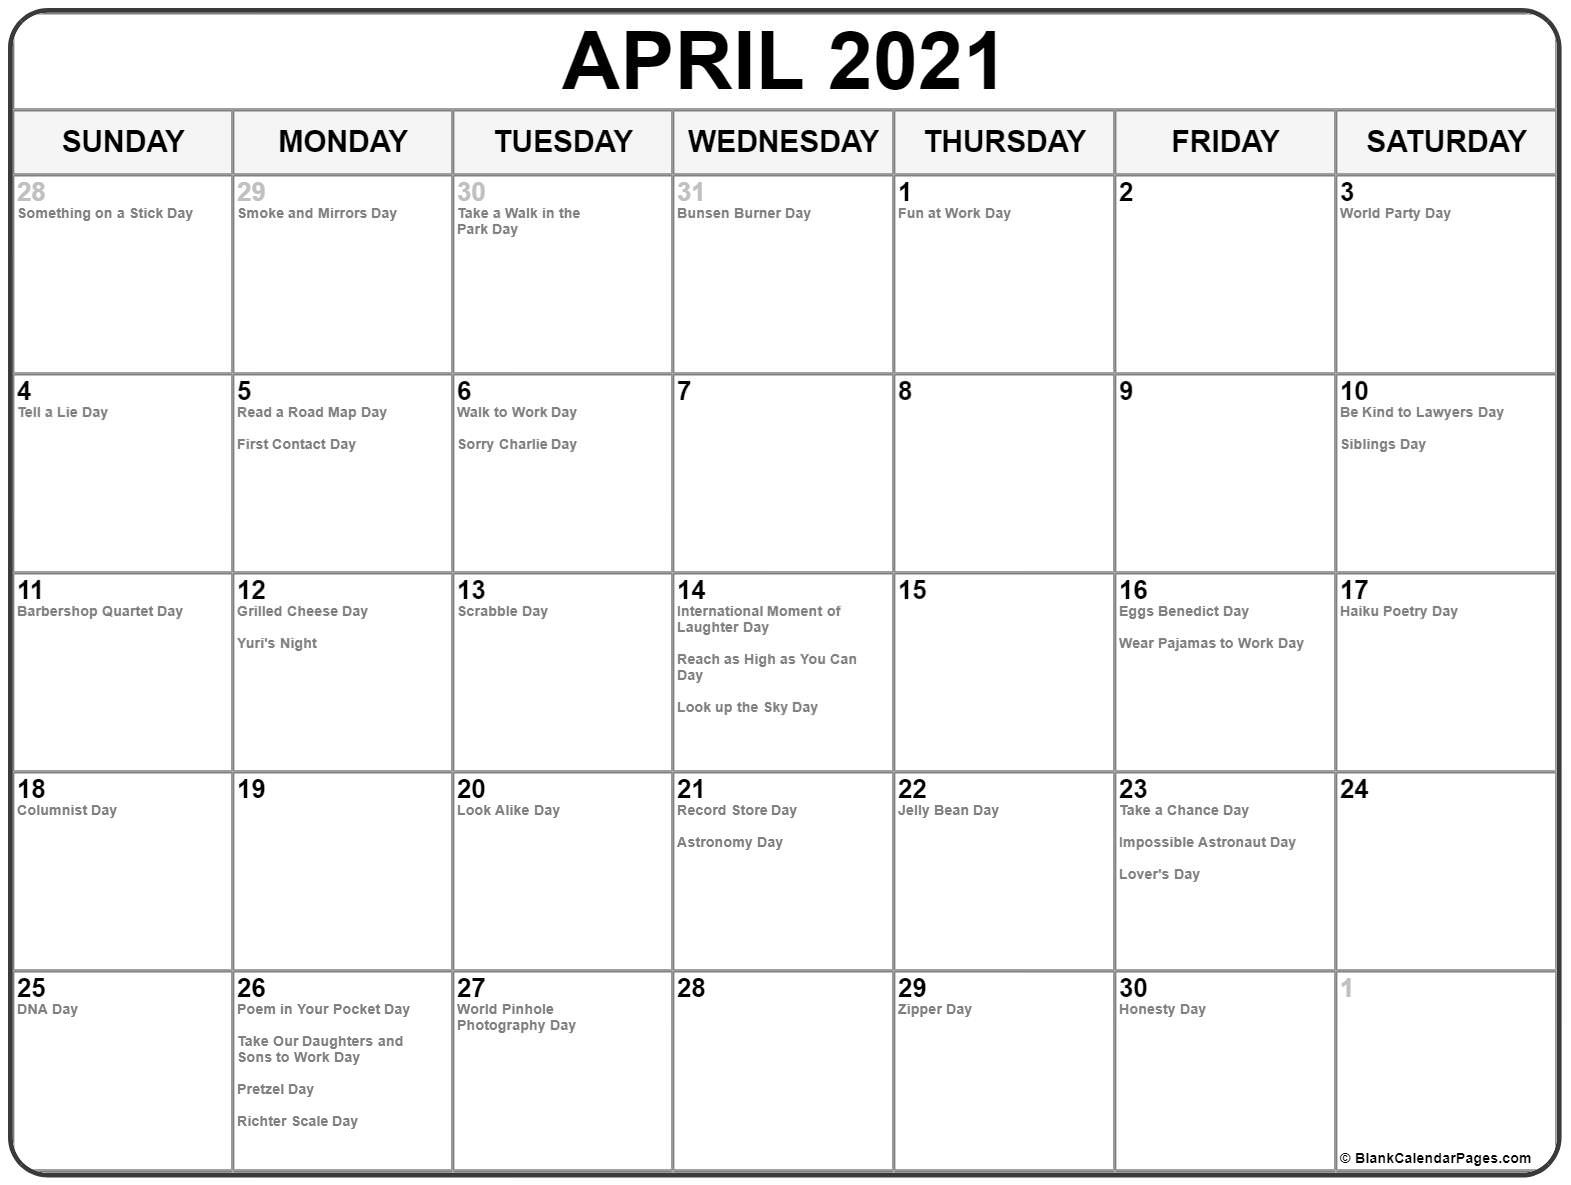 Collection of April 2021 calendars with holidays